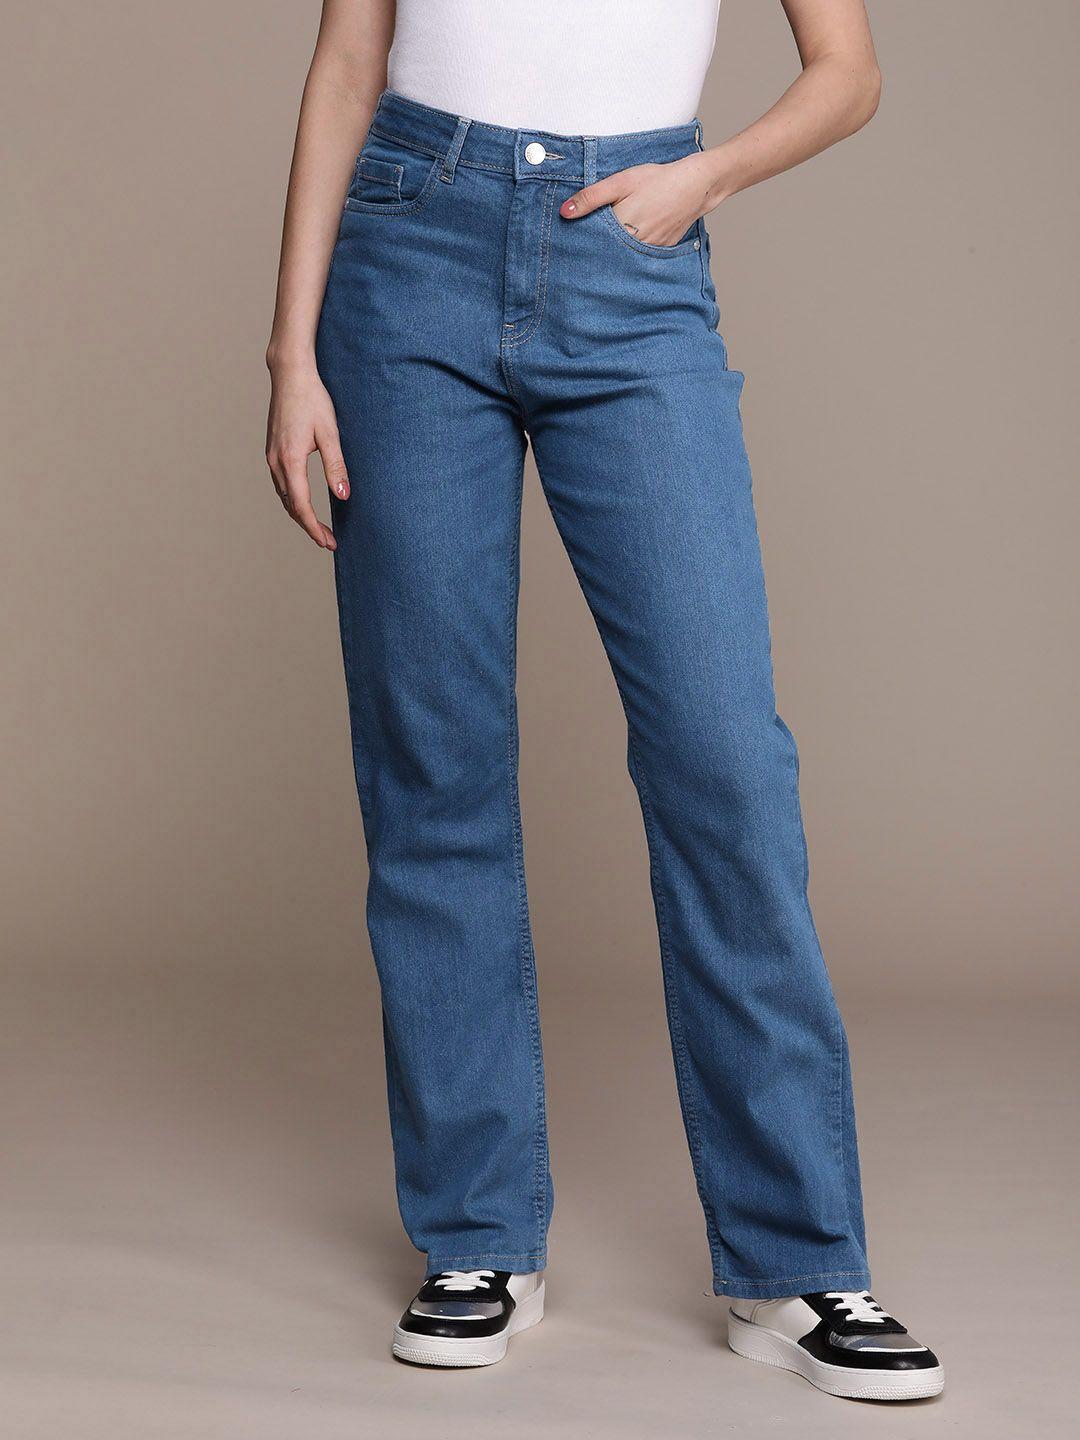 The Roadster Life Co. Women Straight Fit High-Rise Stretchable Jeans